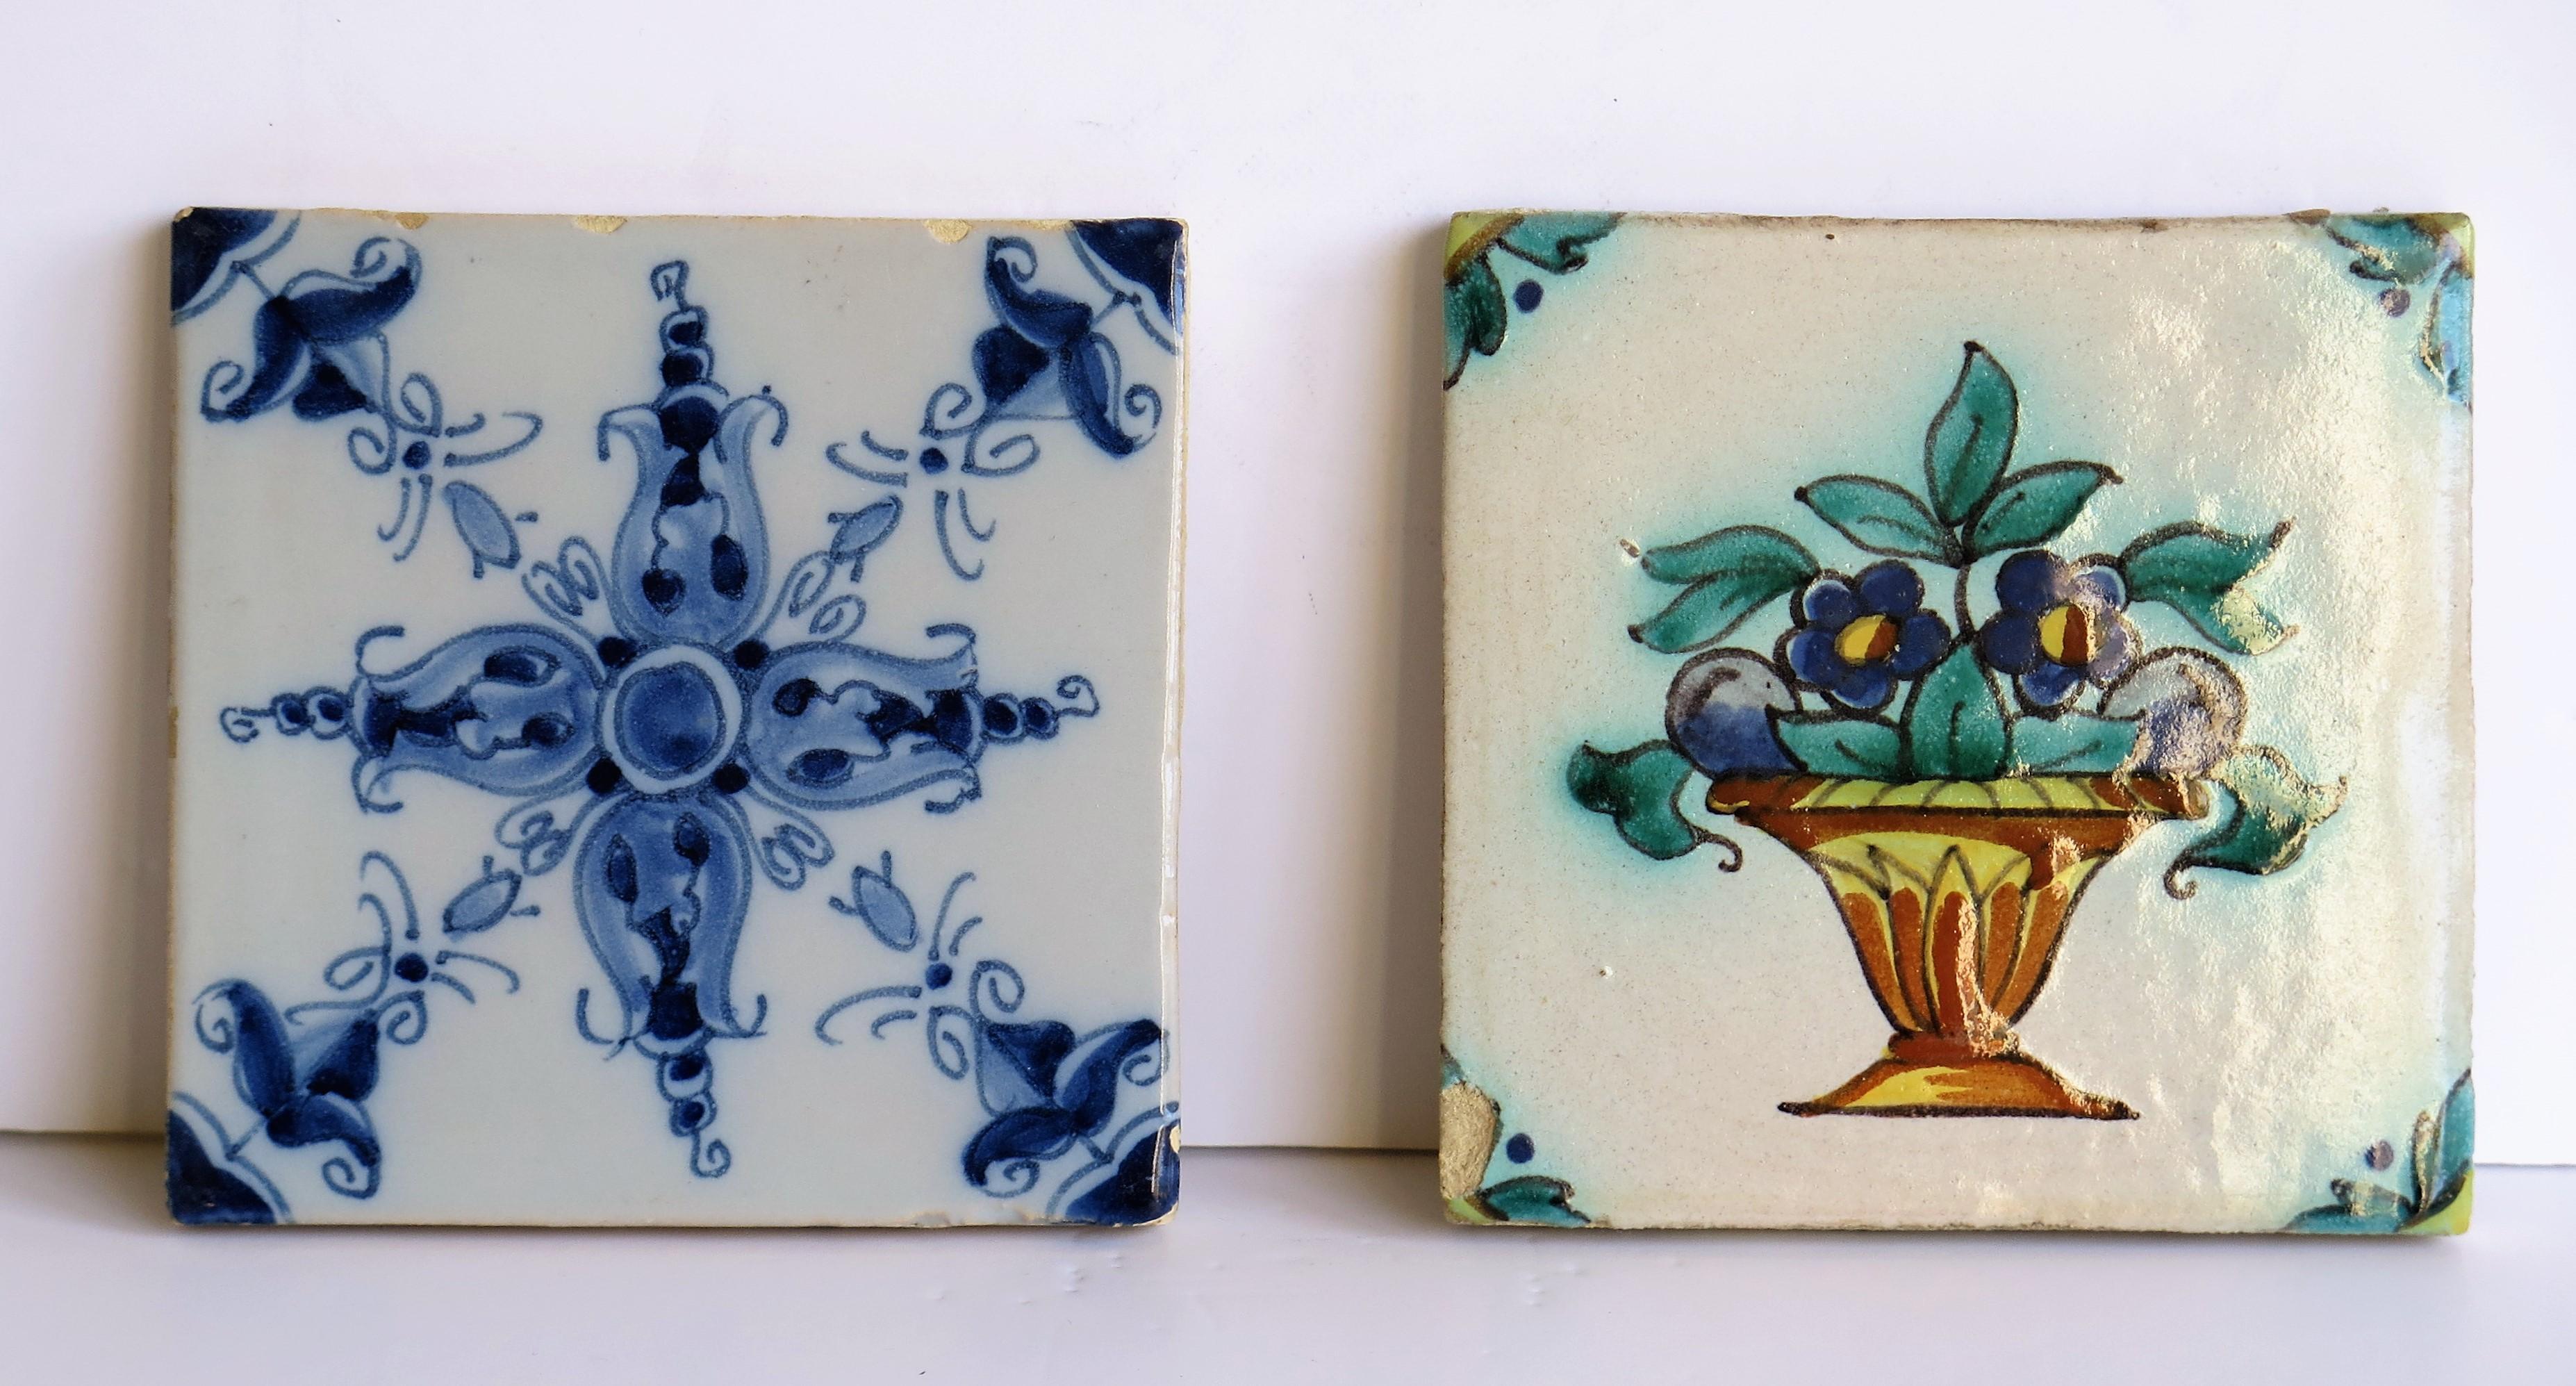 Hand-Painted Two 19th Century Dutch Delft Ceramic Wall Tiles Hand Painted Floral Patterns